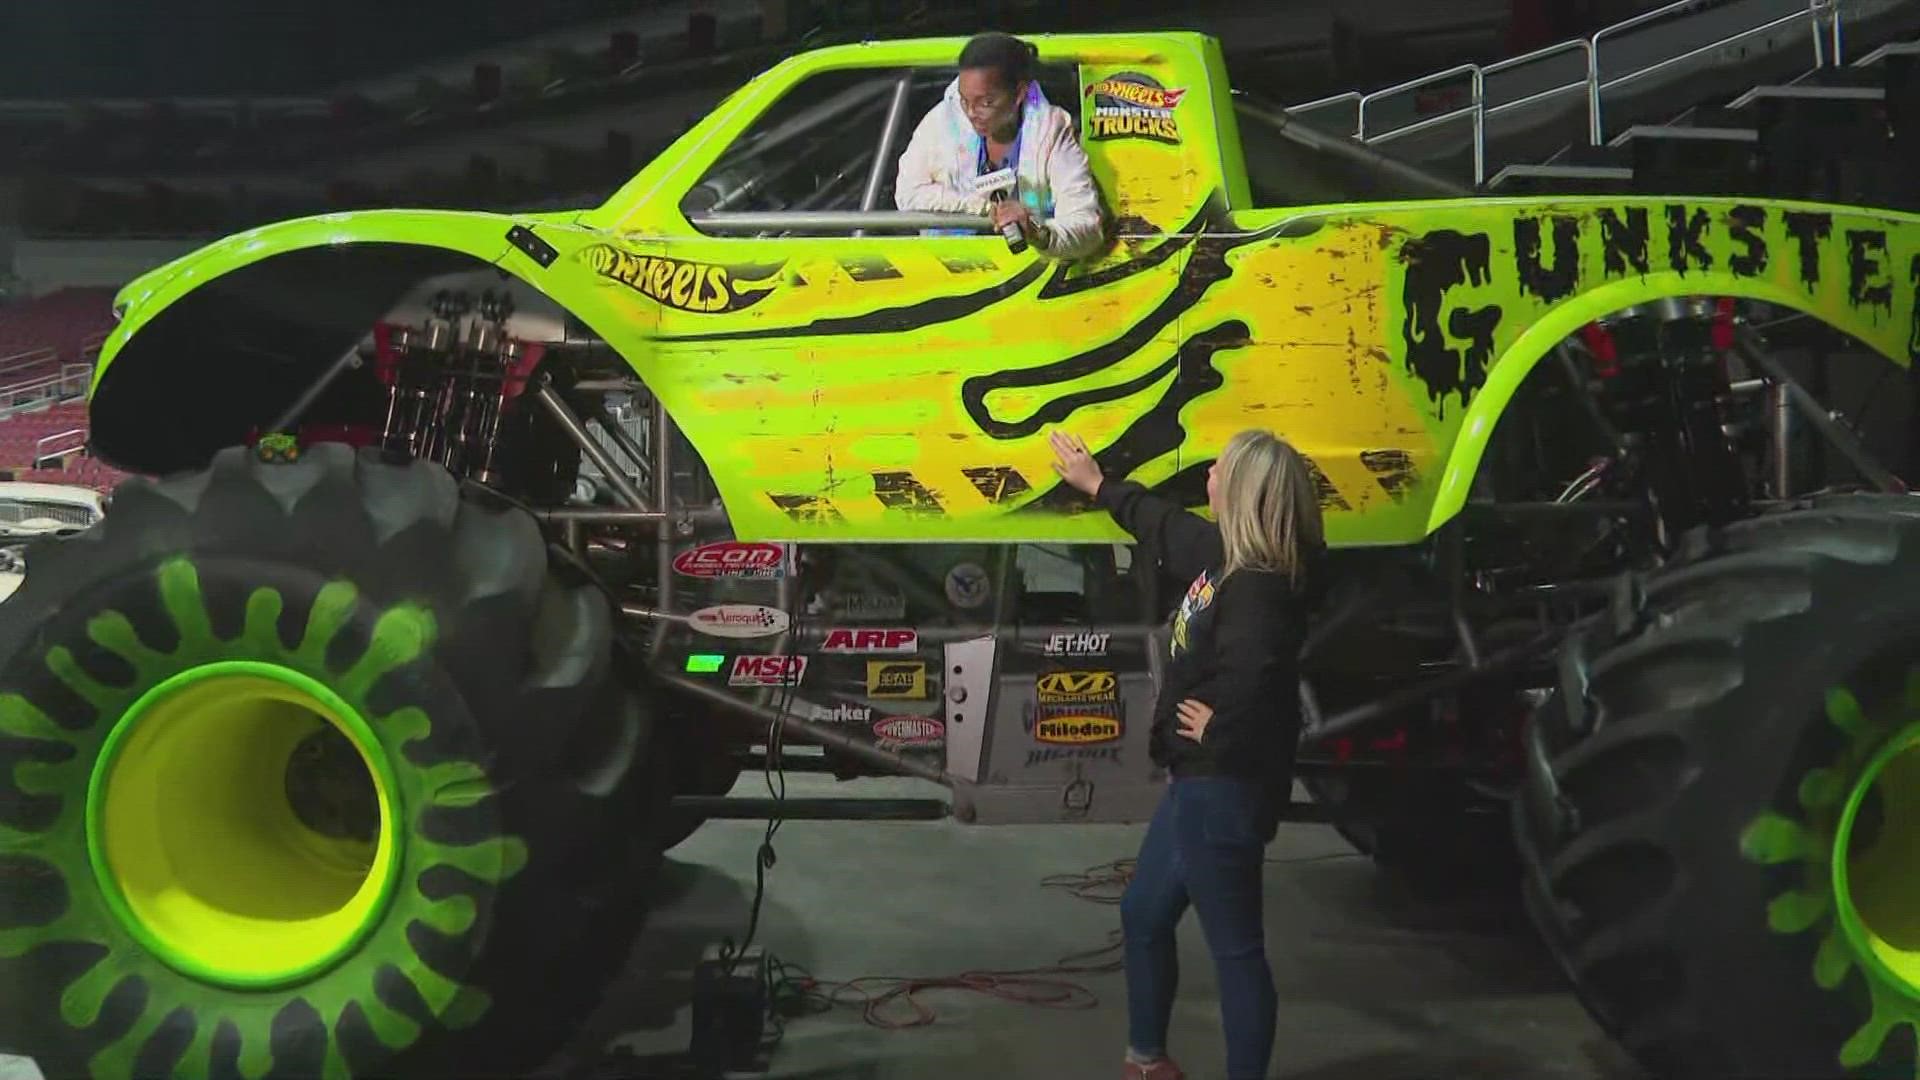 Hot Wheels Monster Trucks Live Glow Party coming to Louisville